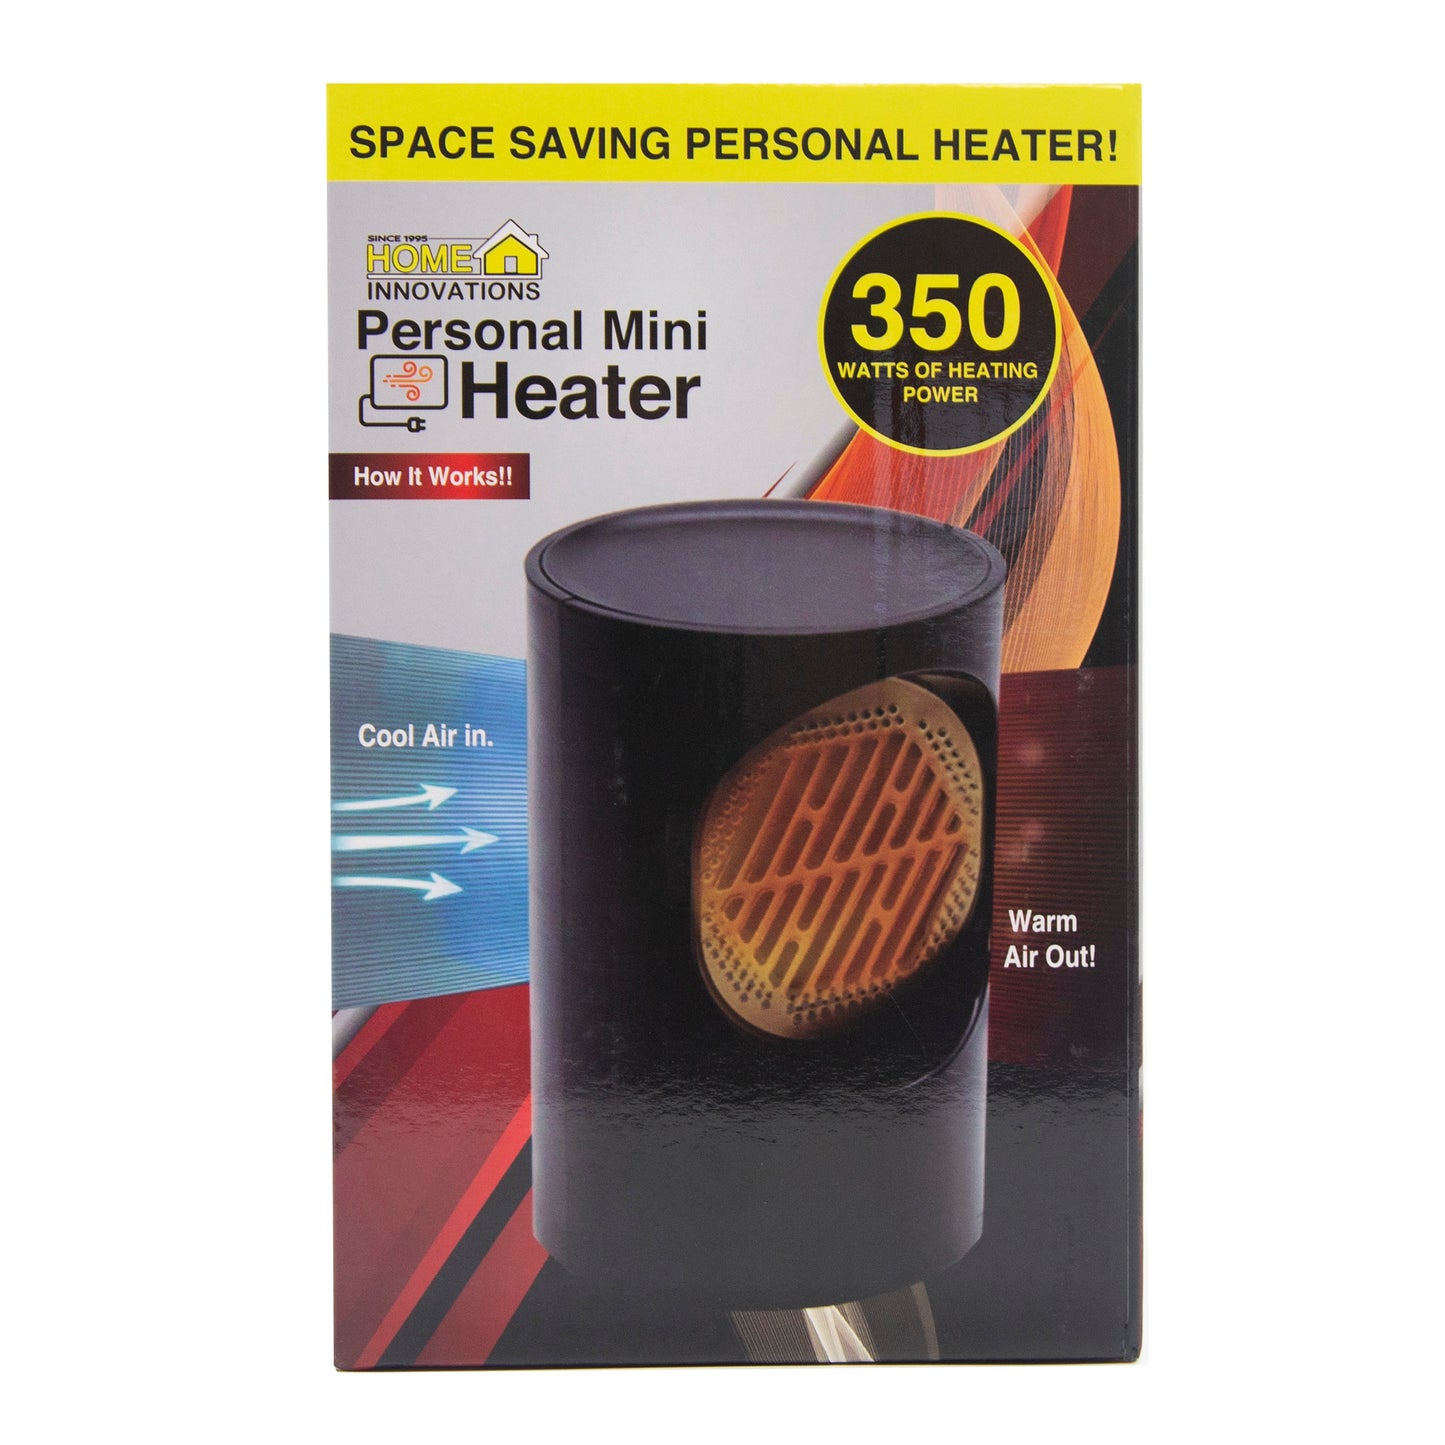 Home Innovations Personal Mini Heater & Total Life Essentials 250 ml Aroma Diffuser with 6 oils for FREE